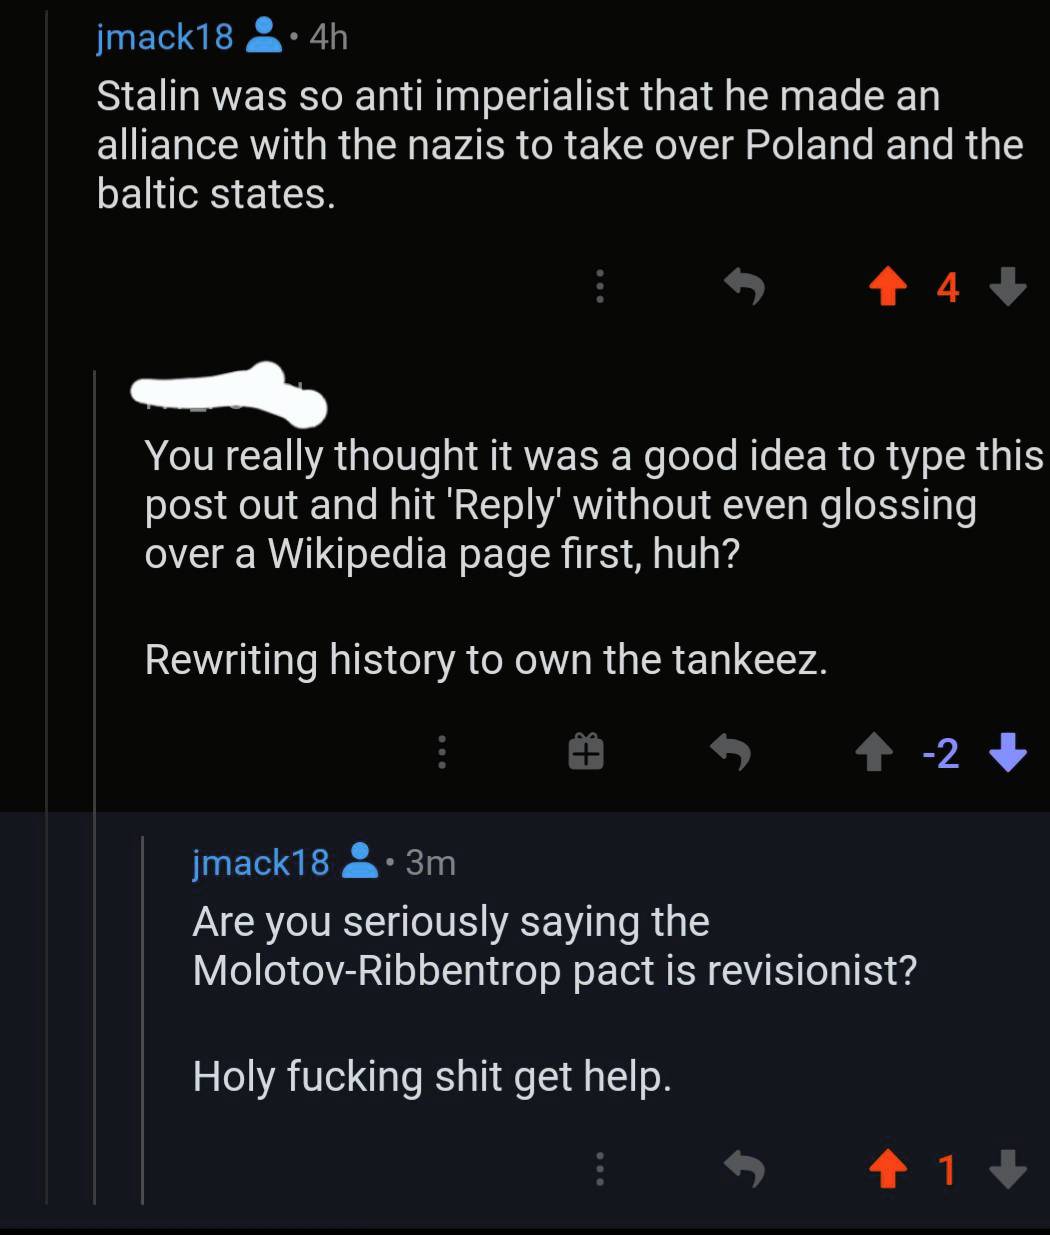 Remember: the Molotov-Ribbentrop pact was allied propaganda | Scrolller